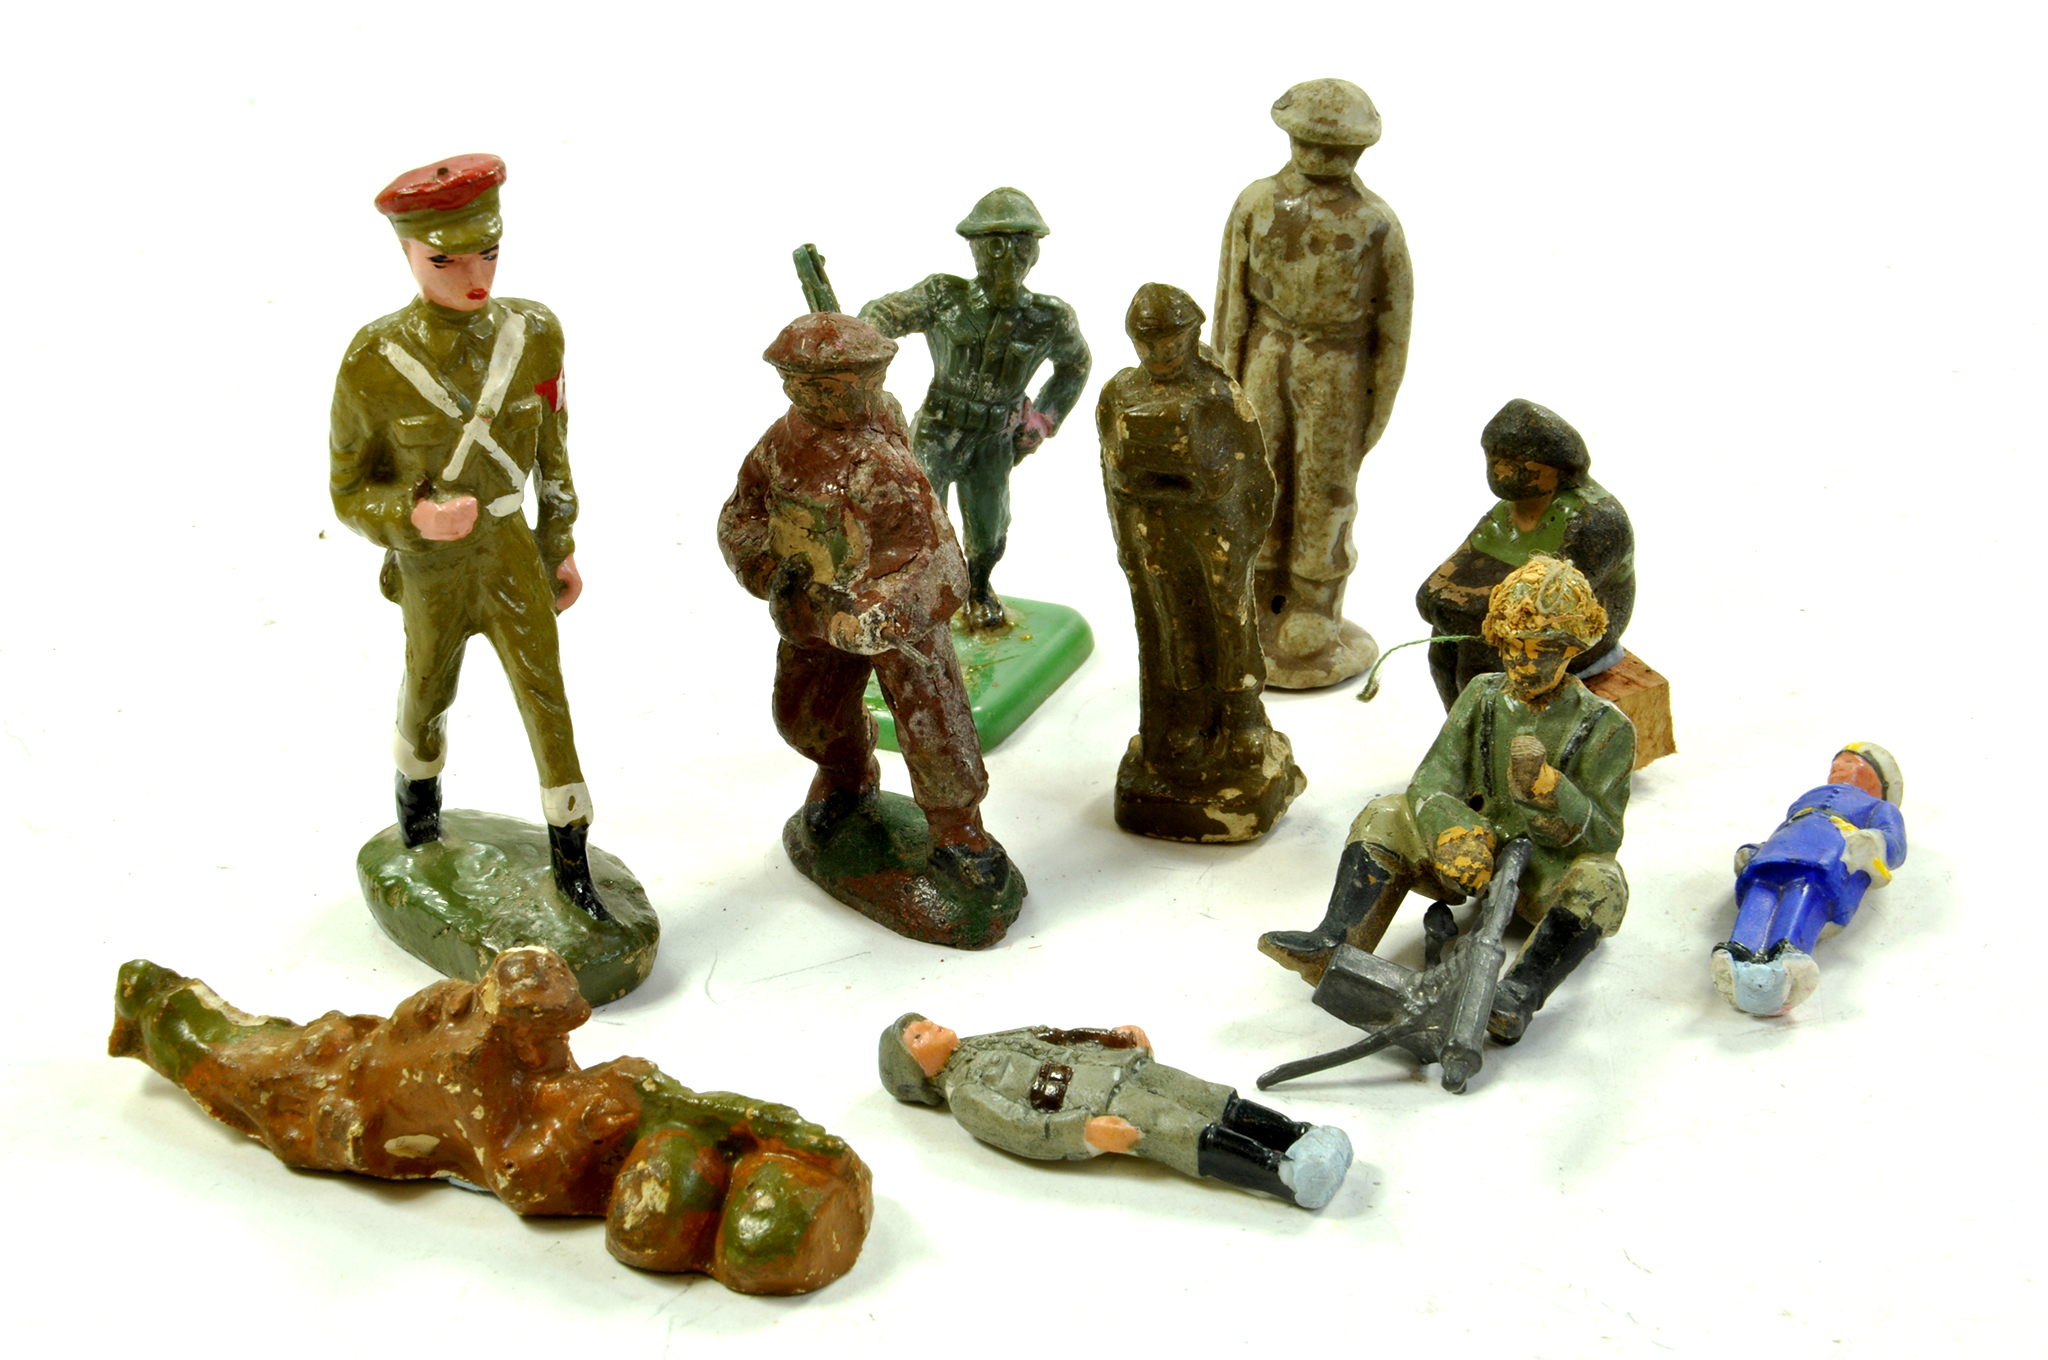 Misc group of compositional figures, various makers. Fair, notable wear on some. Enhanced